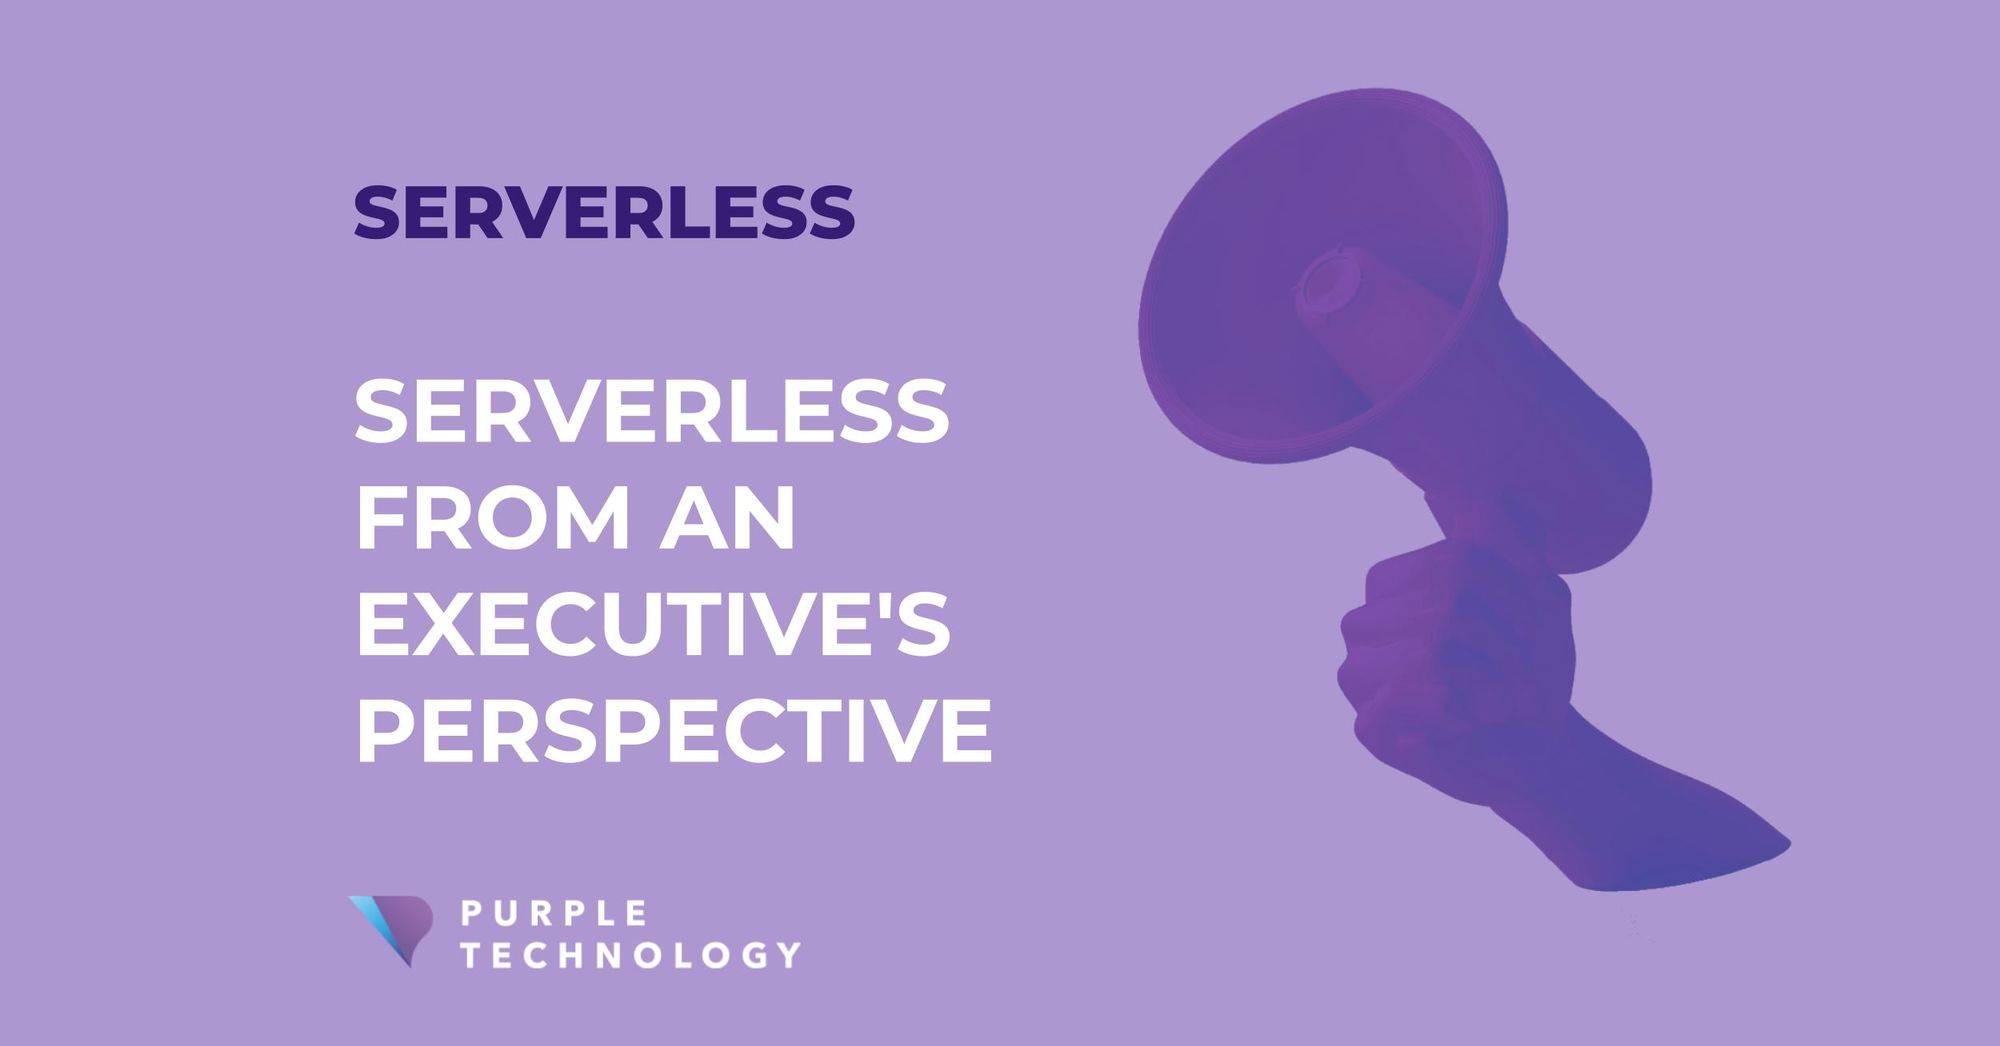 Serverless from an executive's perspective